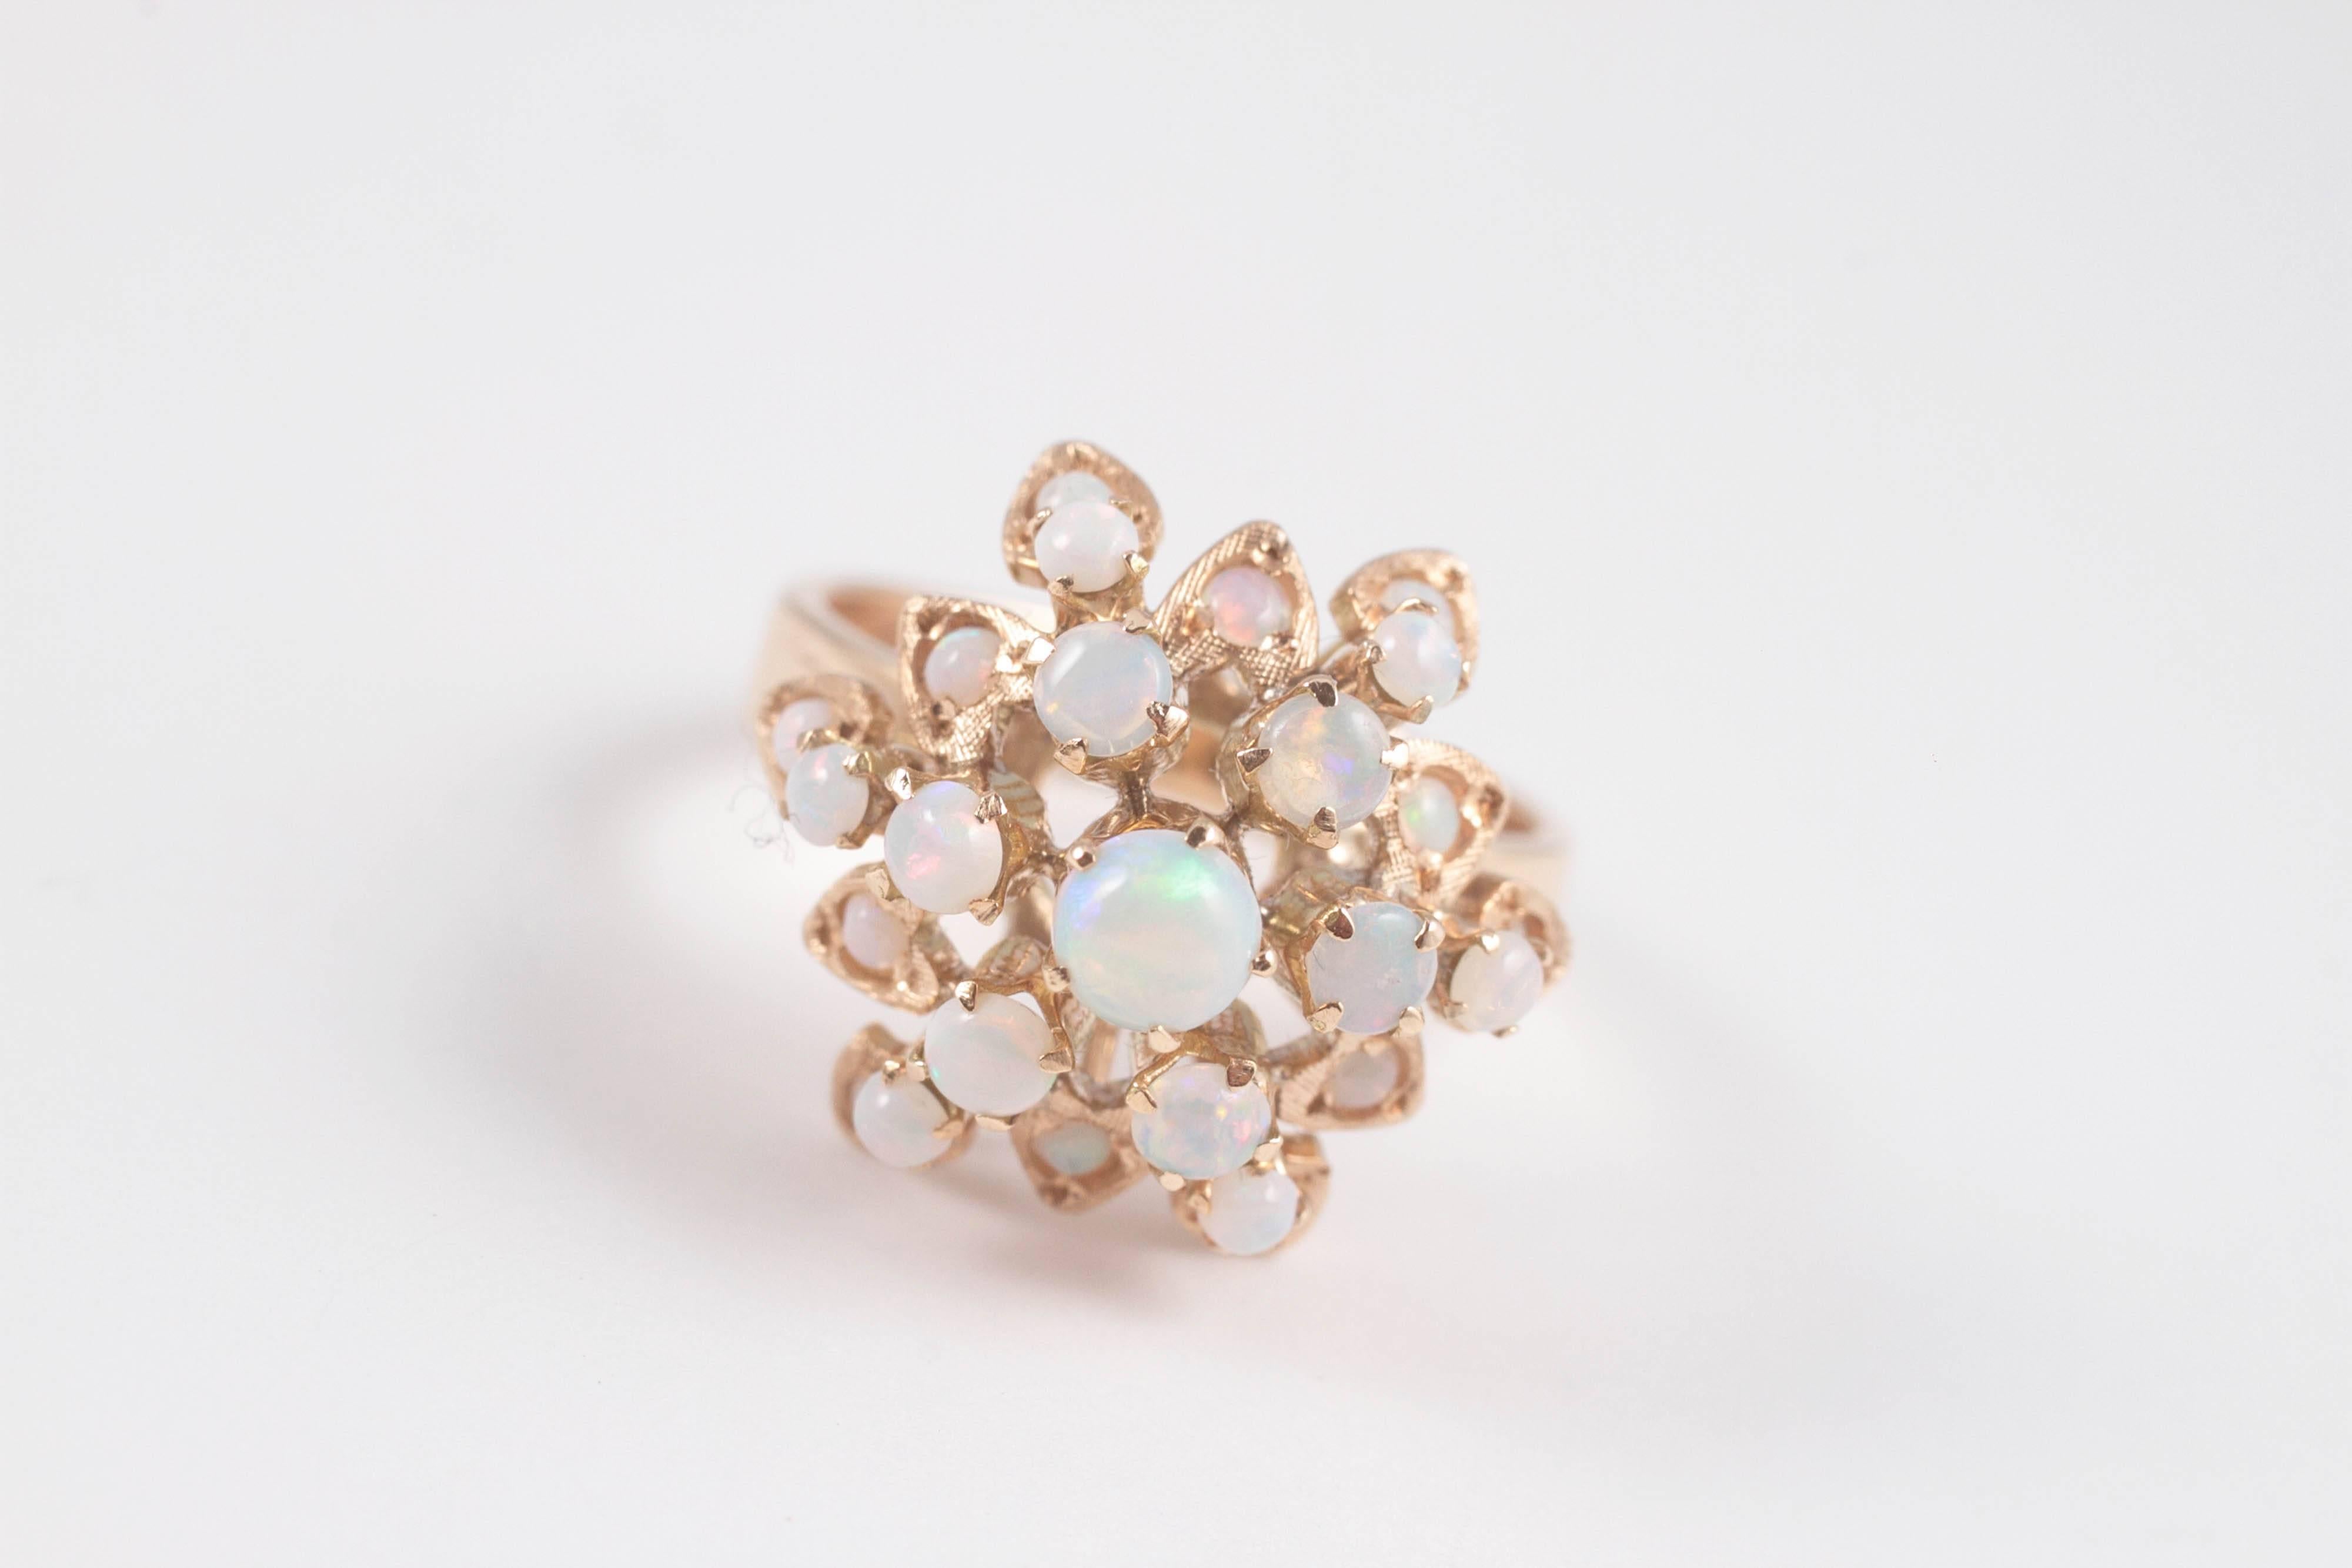 Opals with a lovely play-of-color, in 18 karat yellow gold. Size 6.75